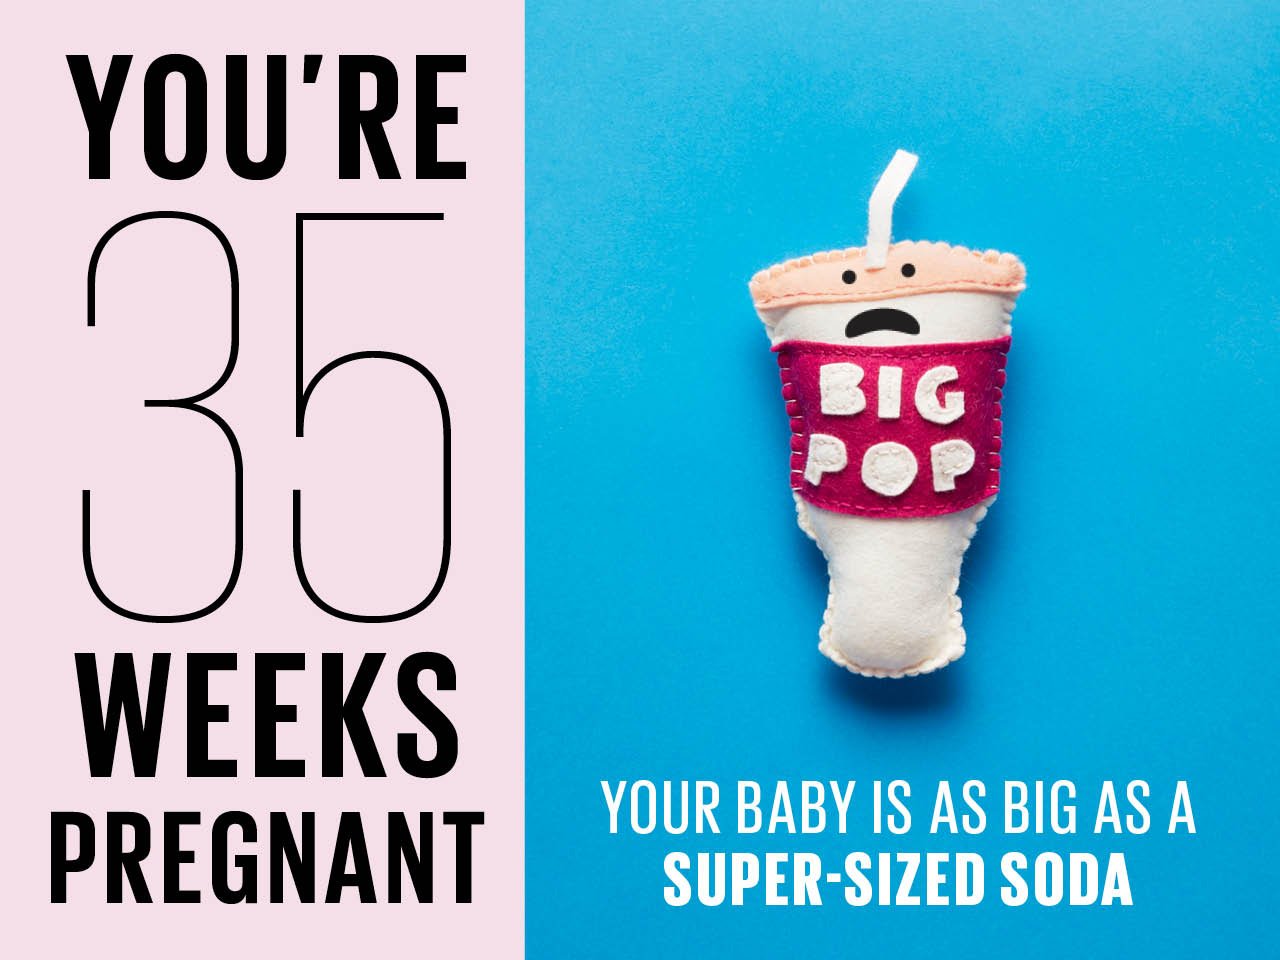 Felt super-sized soda used to show how big baby is at 35 weeks pregnant